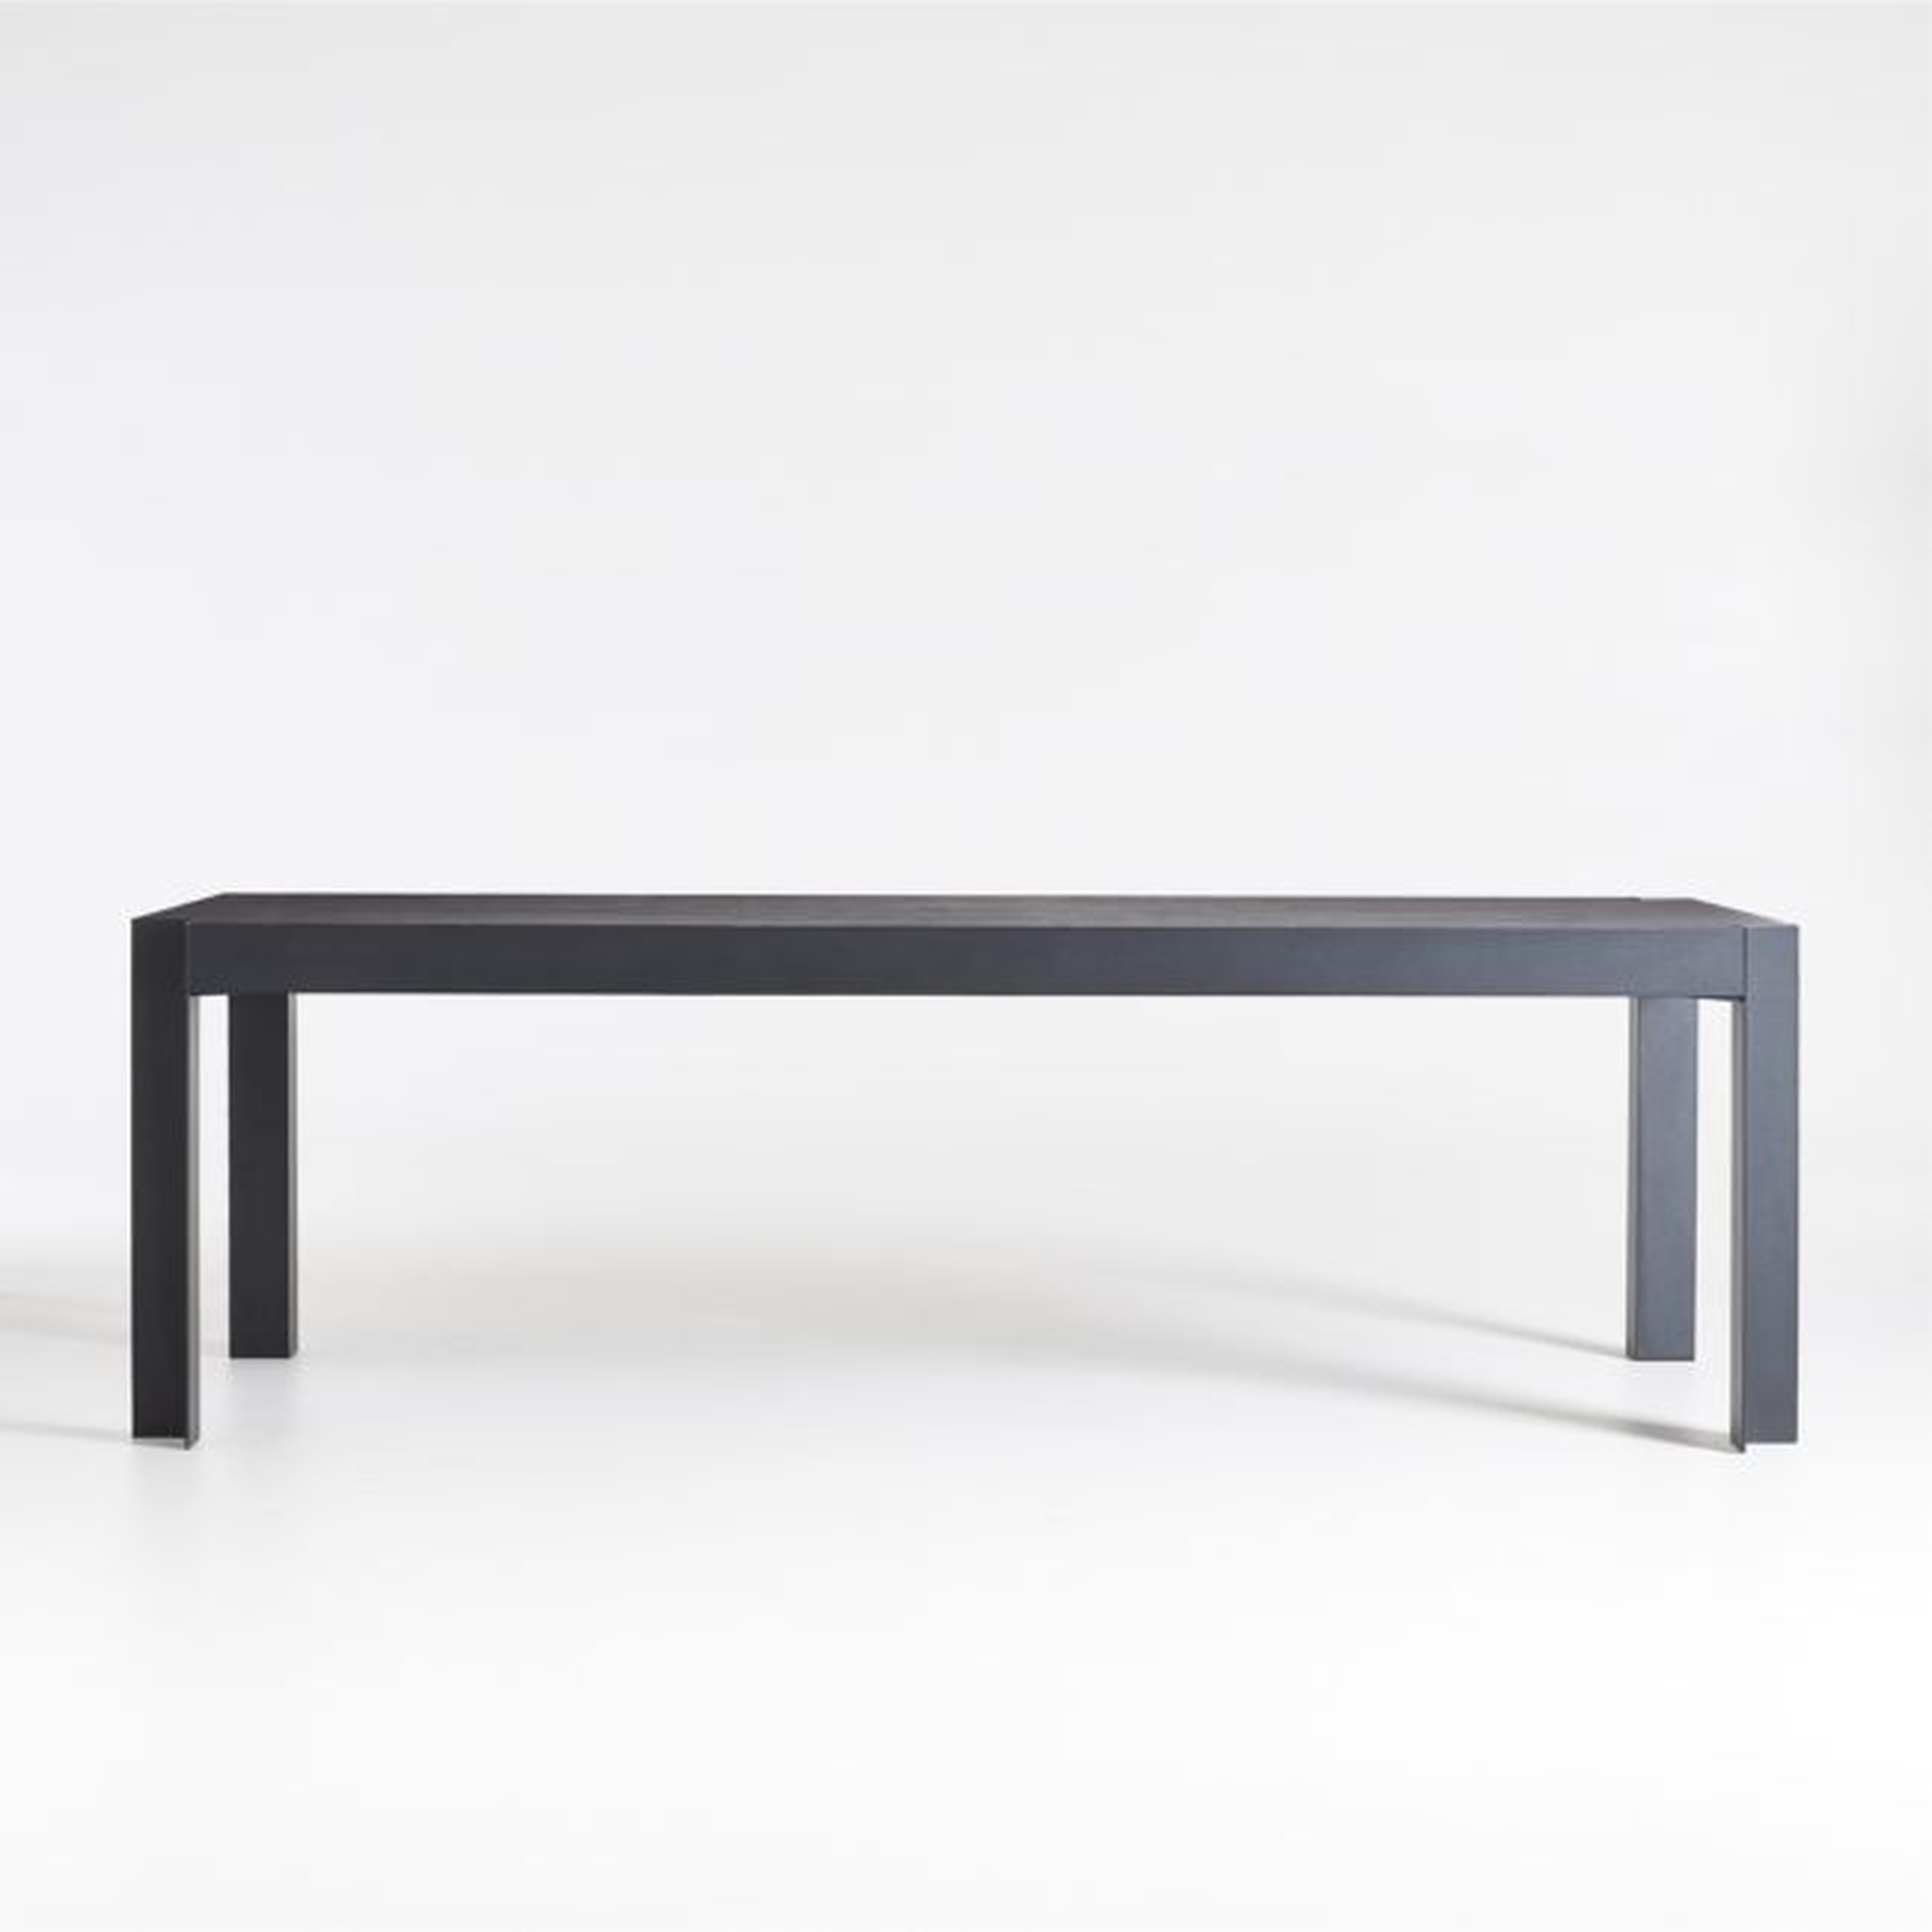 Stijl Black Wood Dining Table - Crate and Barrel